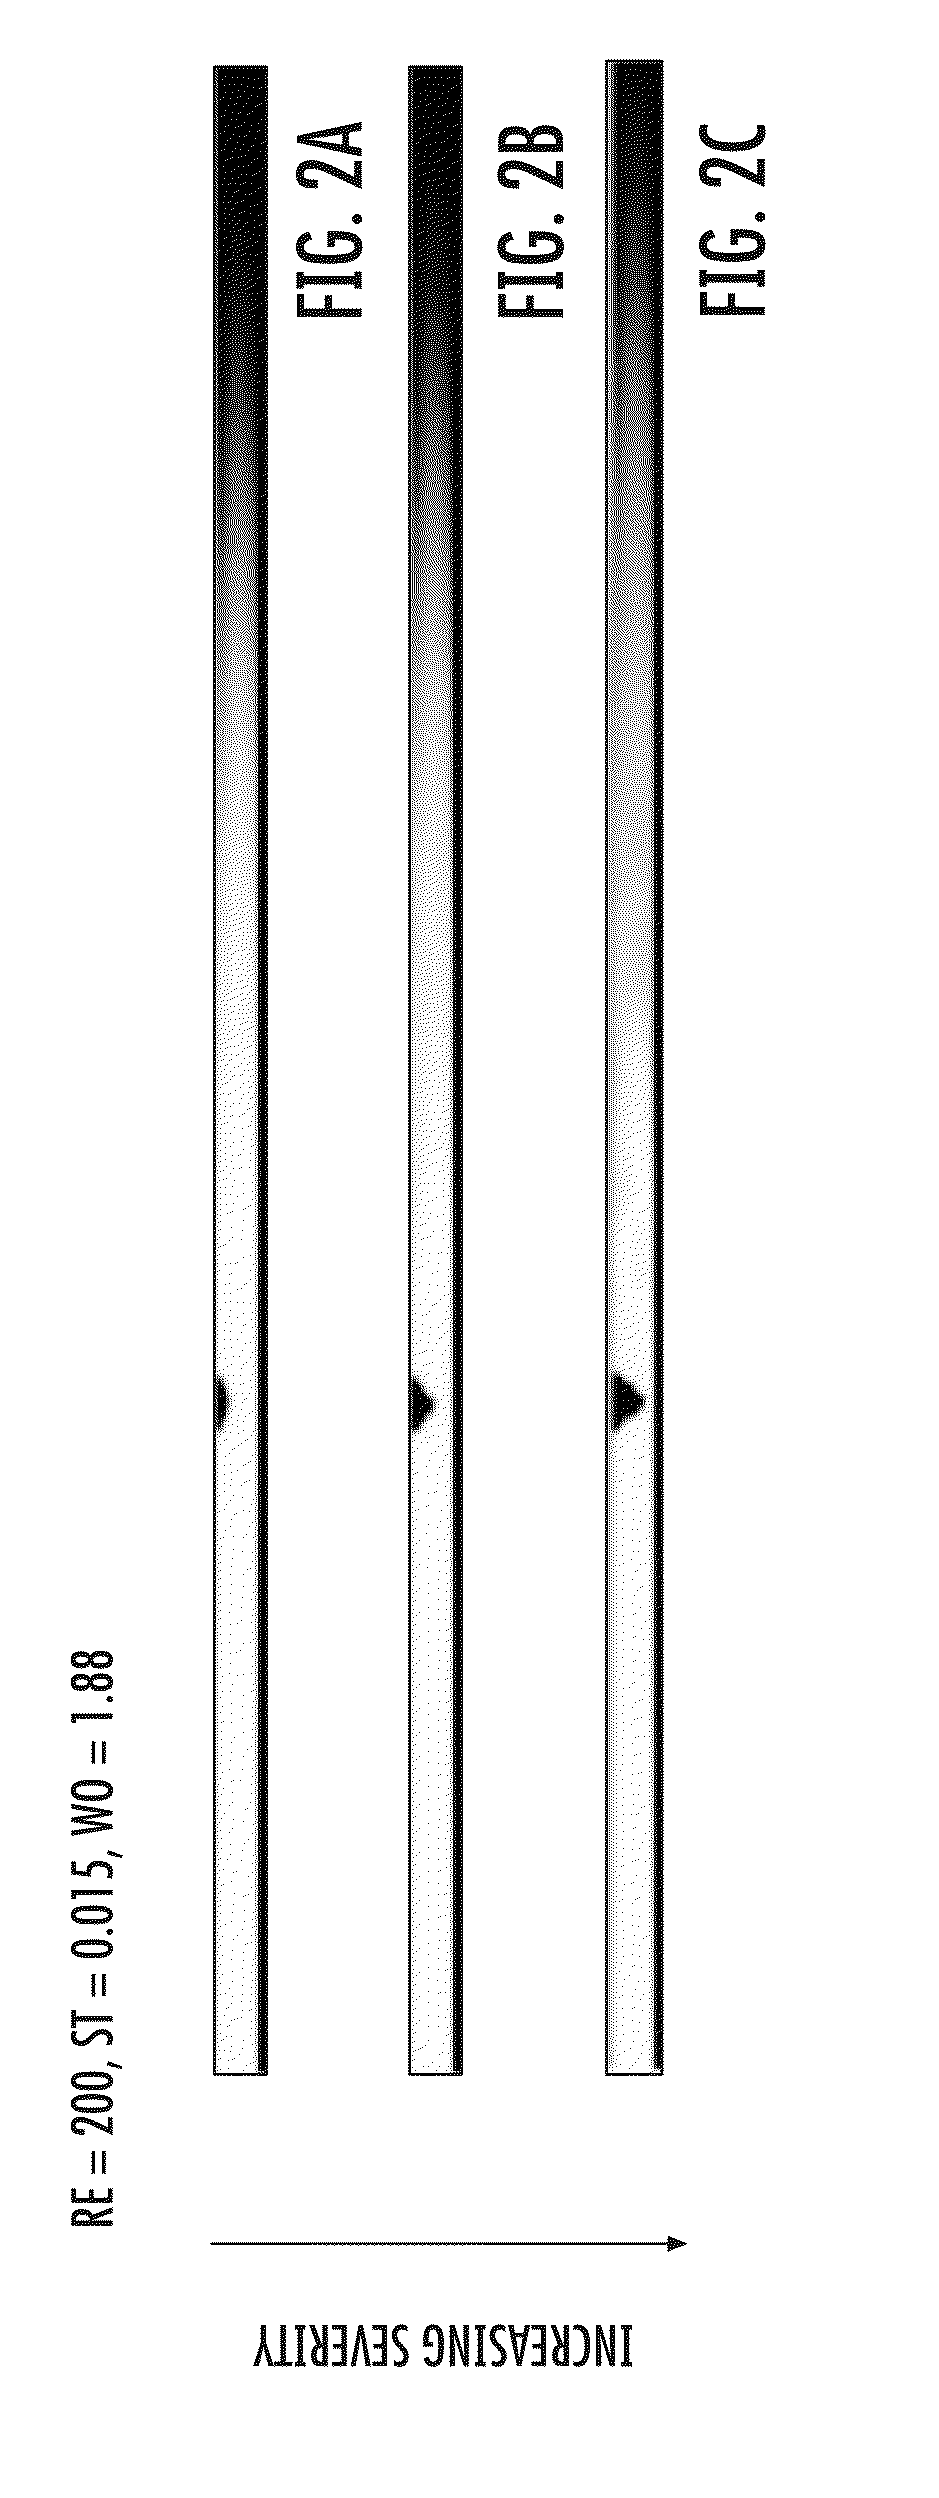 Method for Estimating Pressure Gradients and Fractional Flow Reserve from Computed Tomography Angiography: Transluminal Attenuation Flow Encoding